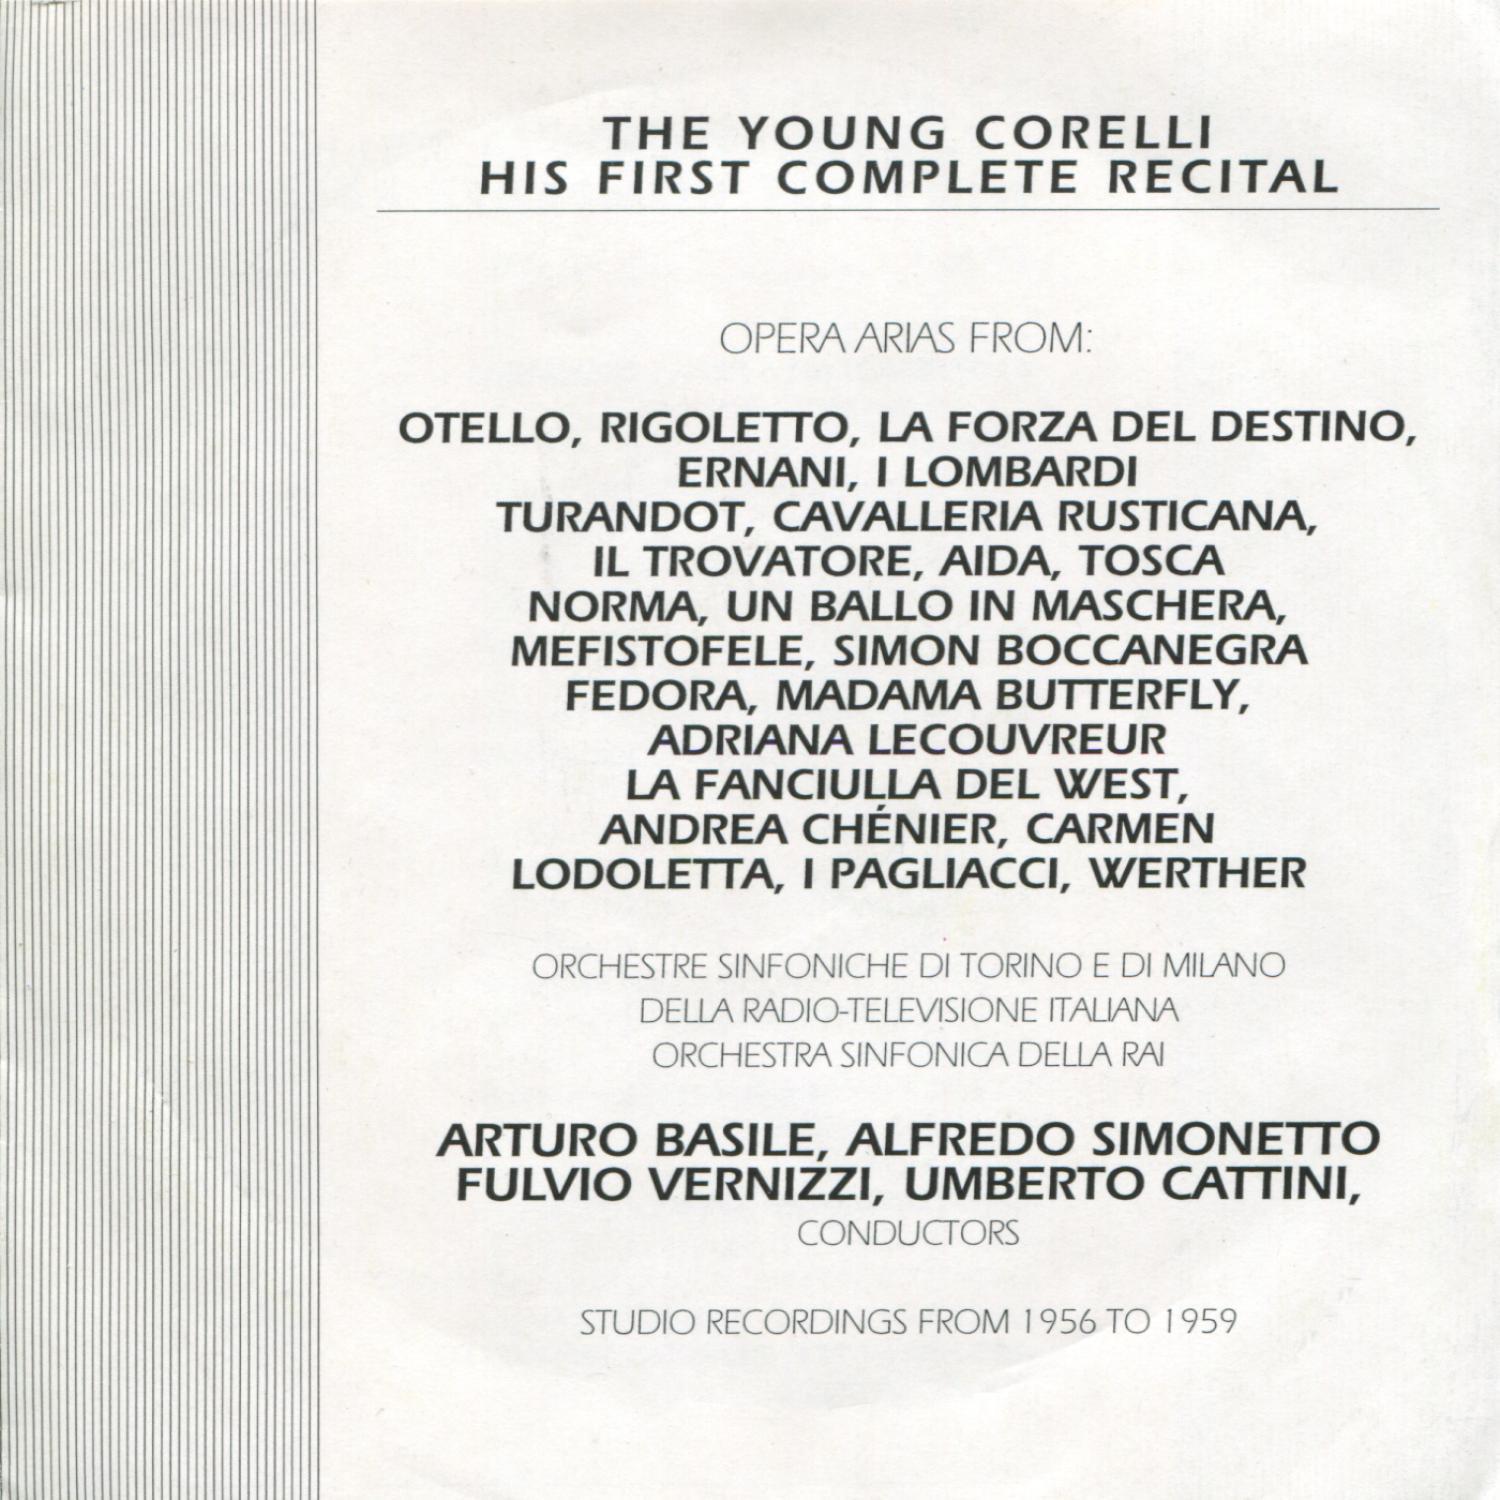 The young Corelli